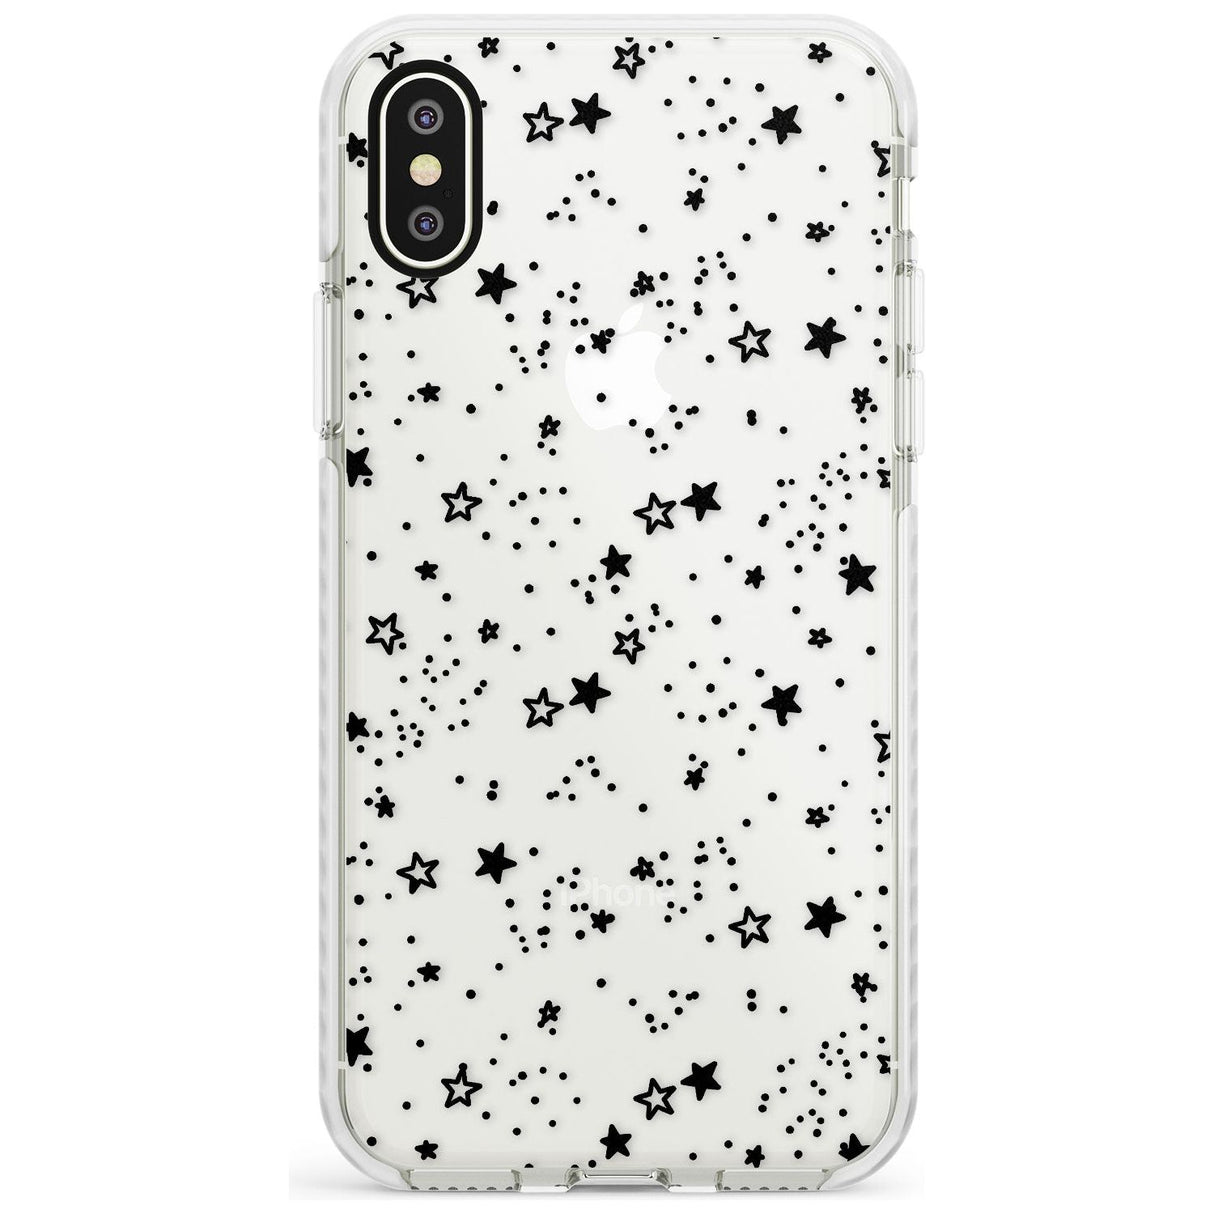 Solid Stars Impact Phone Case for iPhone X XS Max XR